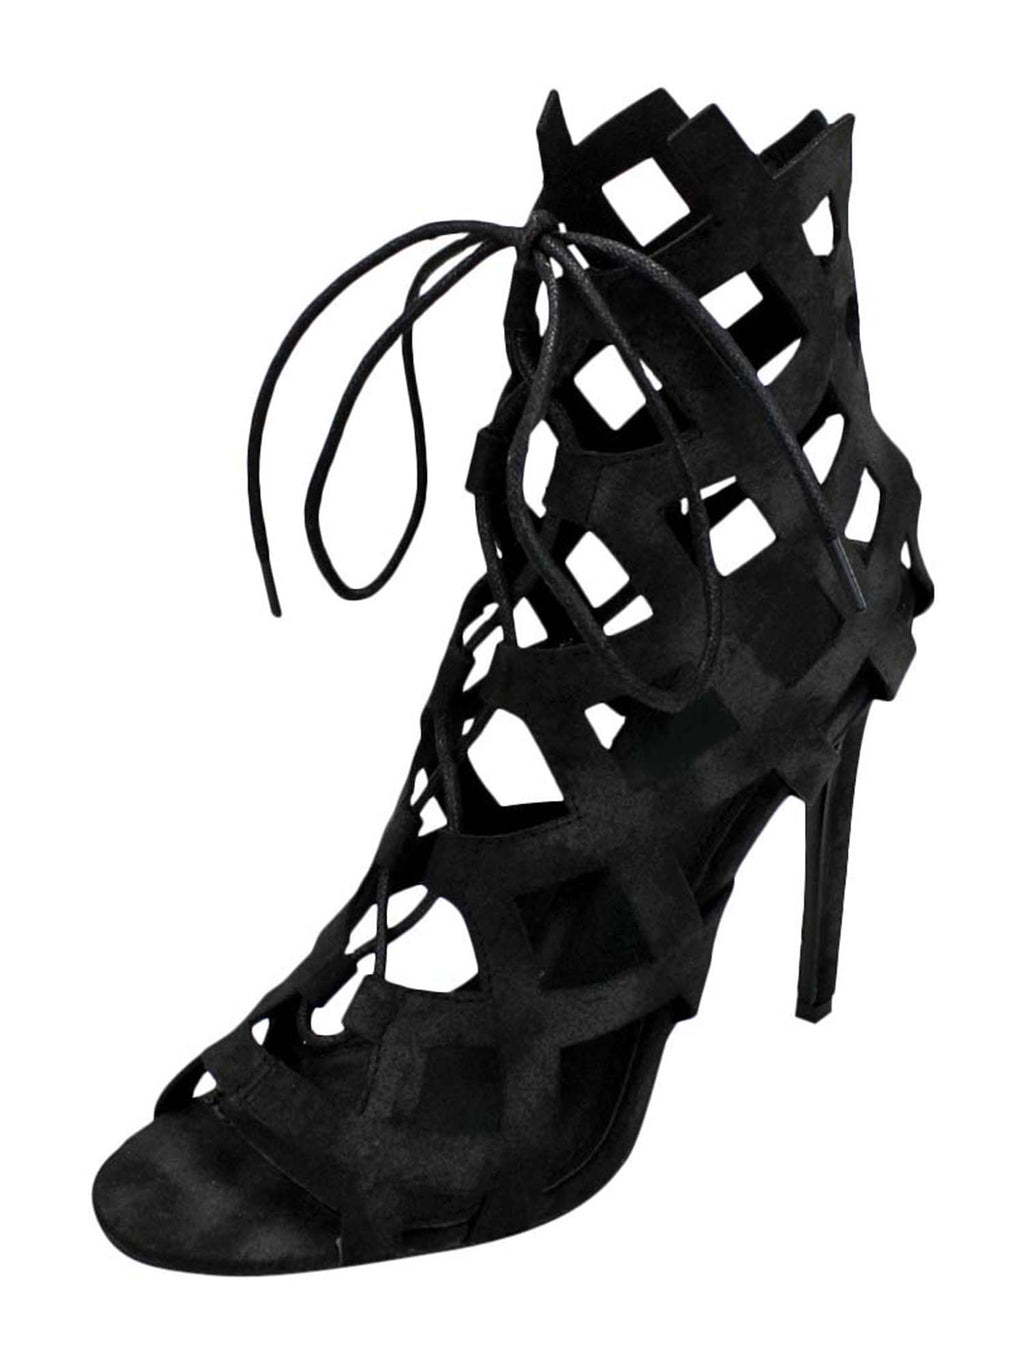 Caged Lace-Up High Heel Womens Booties